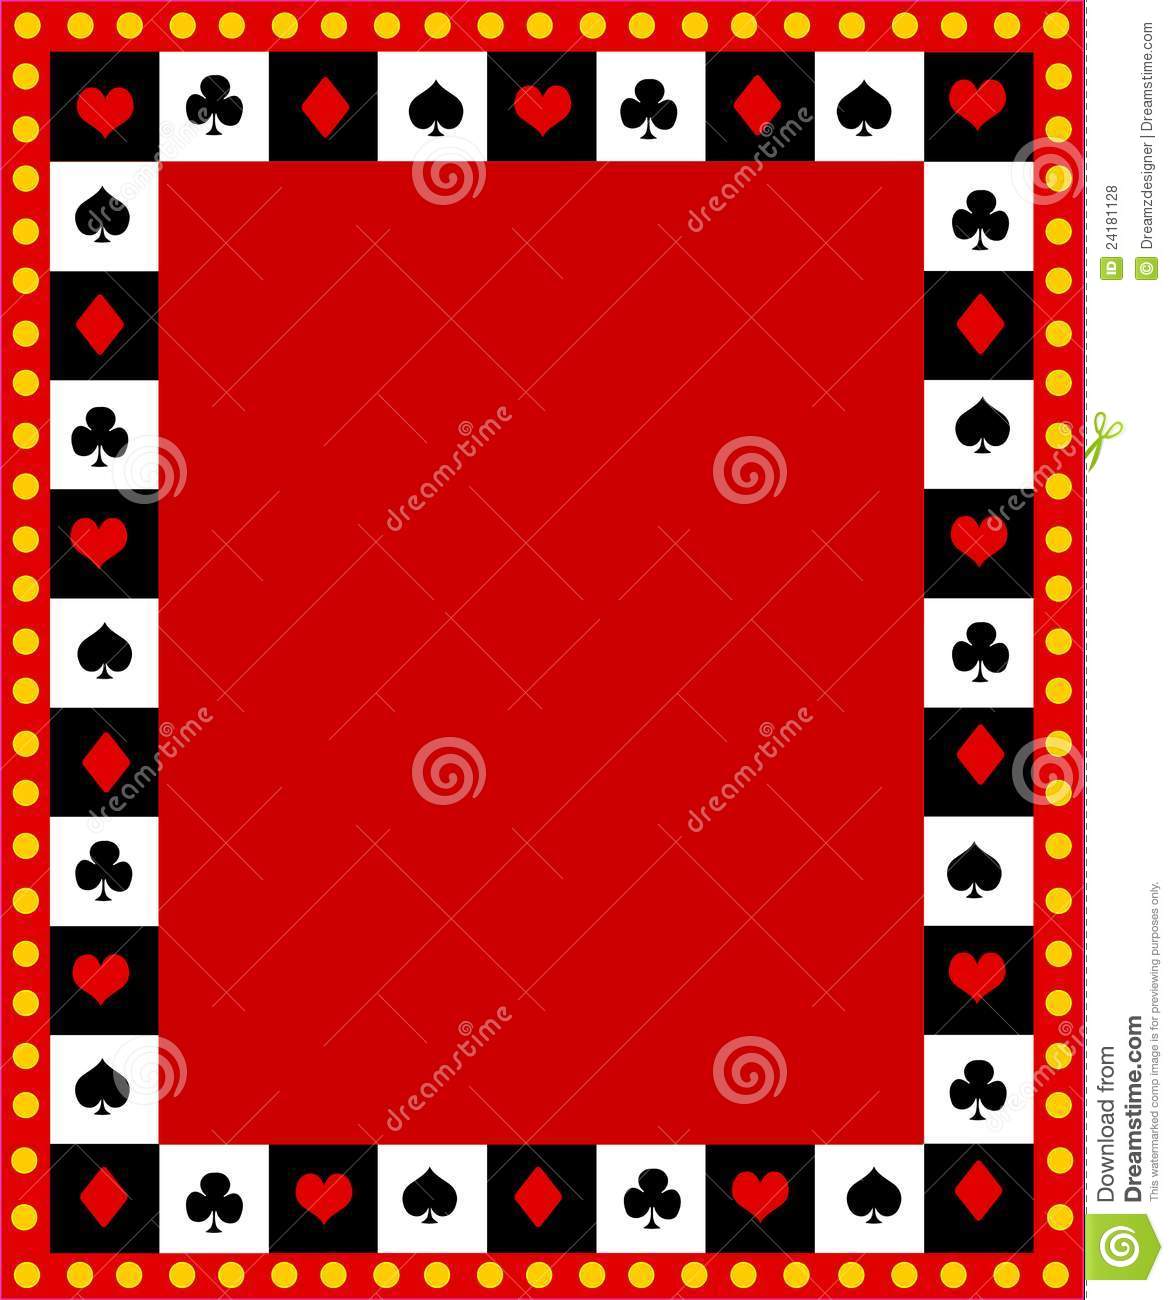 Playing Cards Clipart Border Poker Playing Cards Border